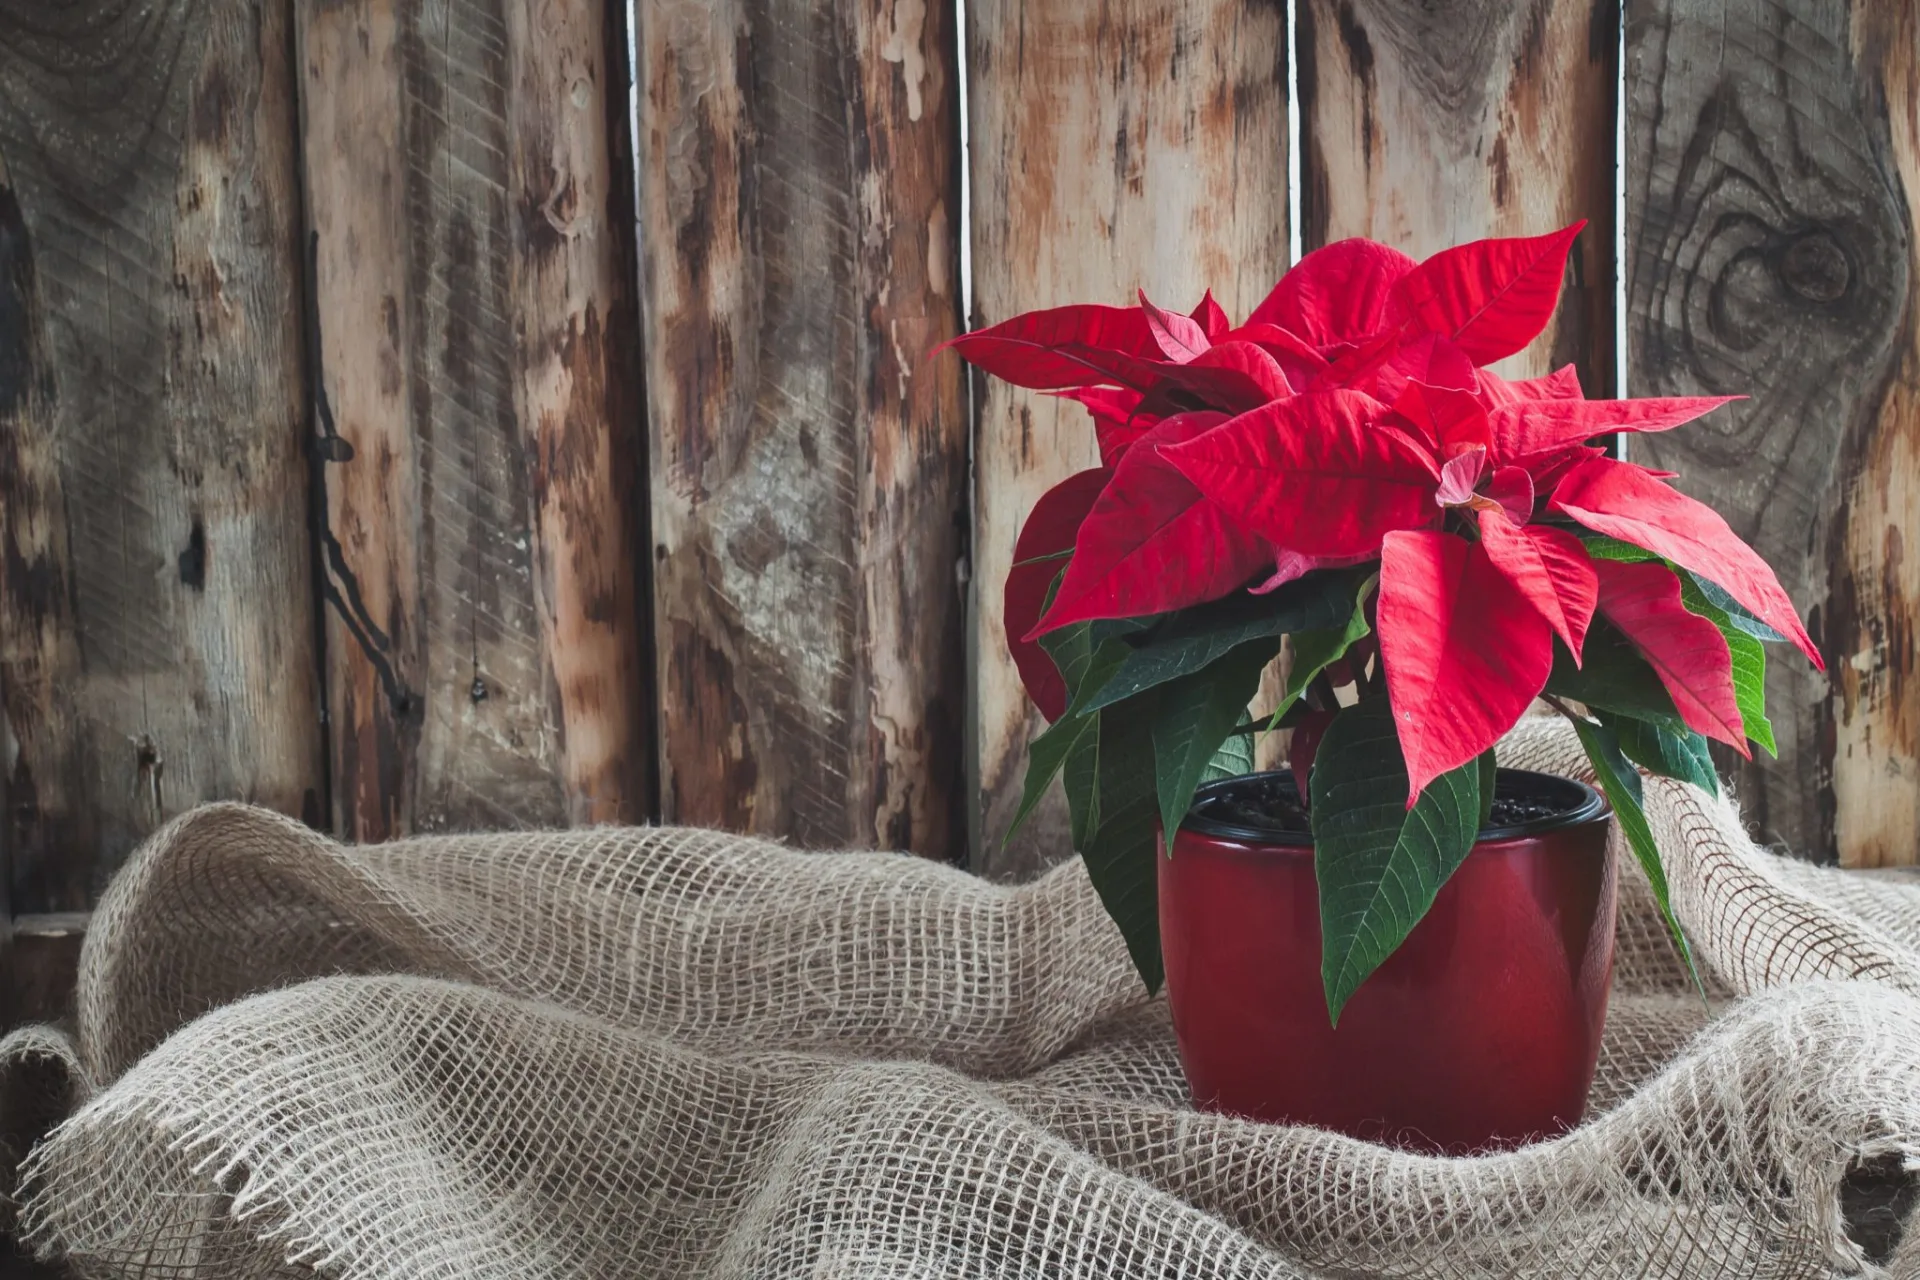 When is National Poinsettia Day?